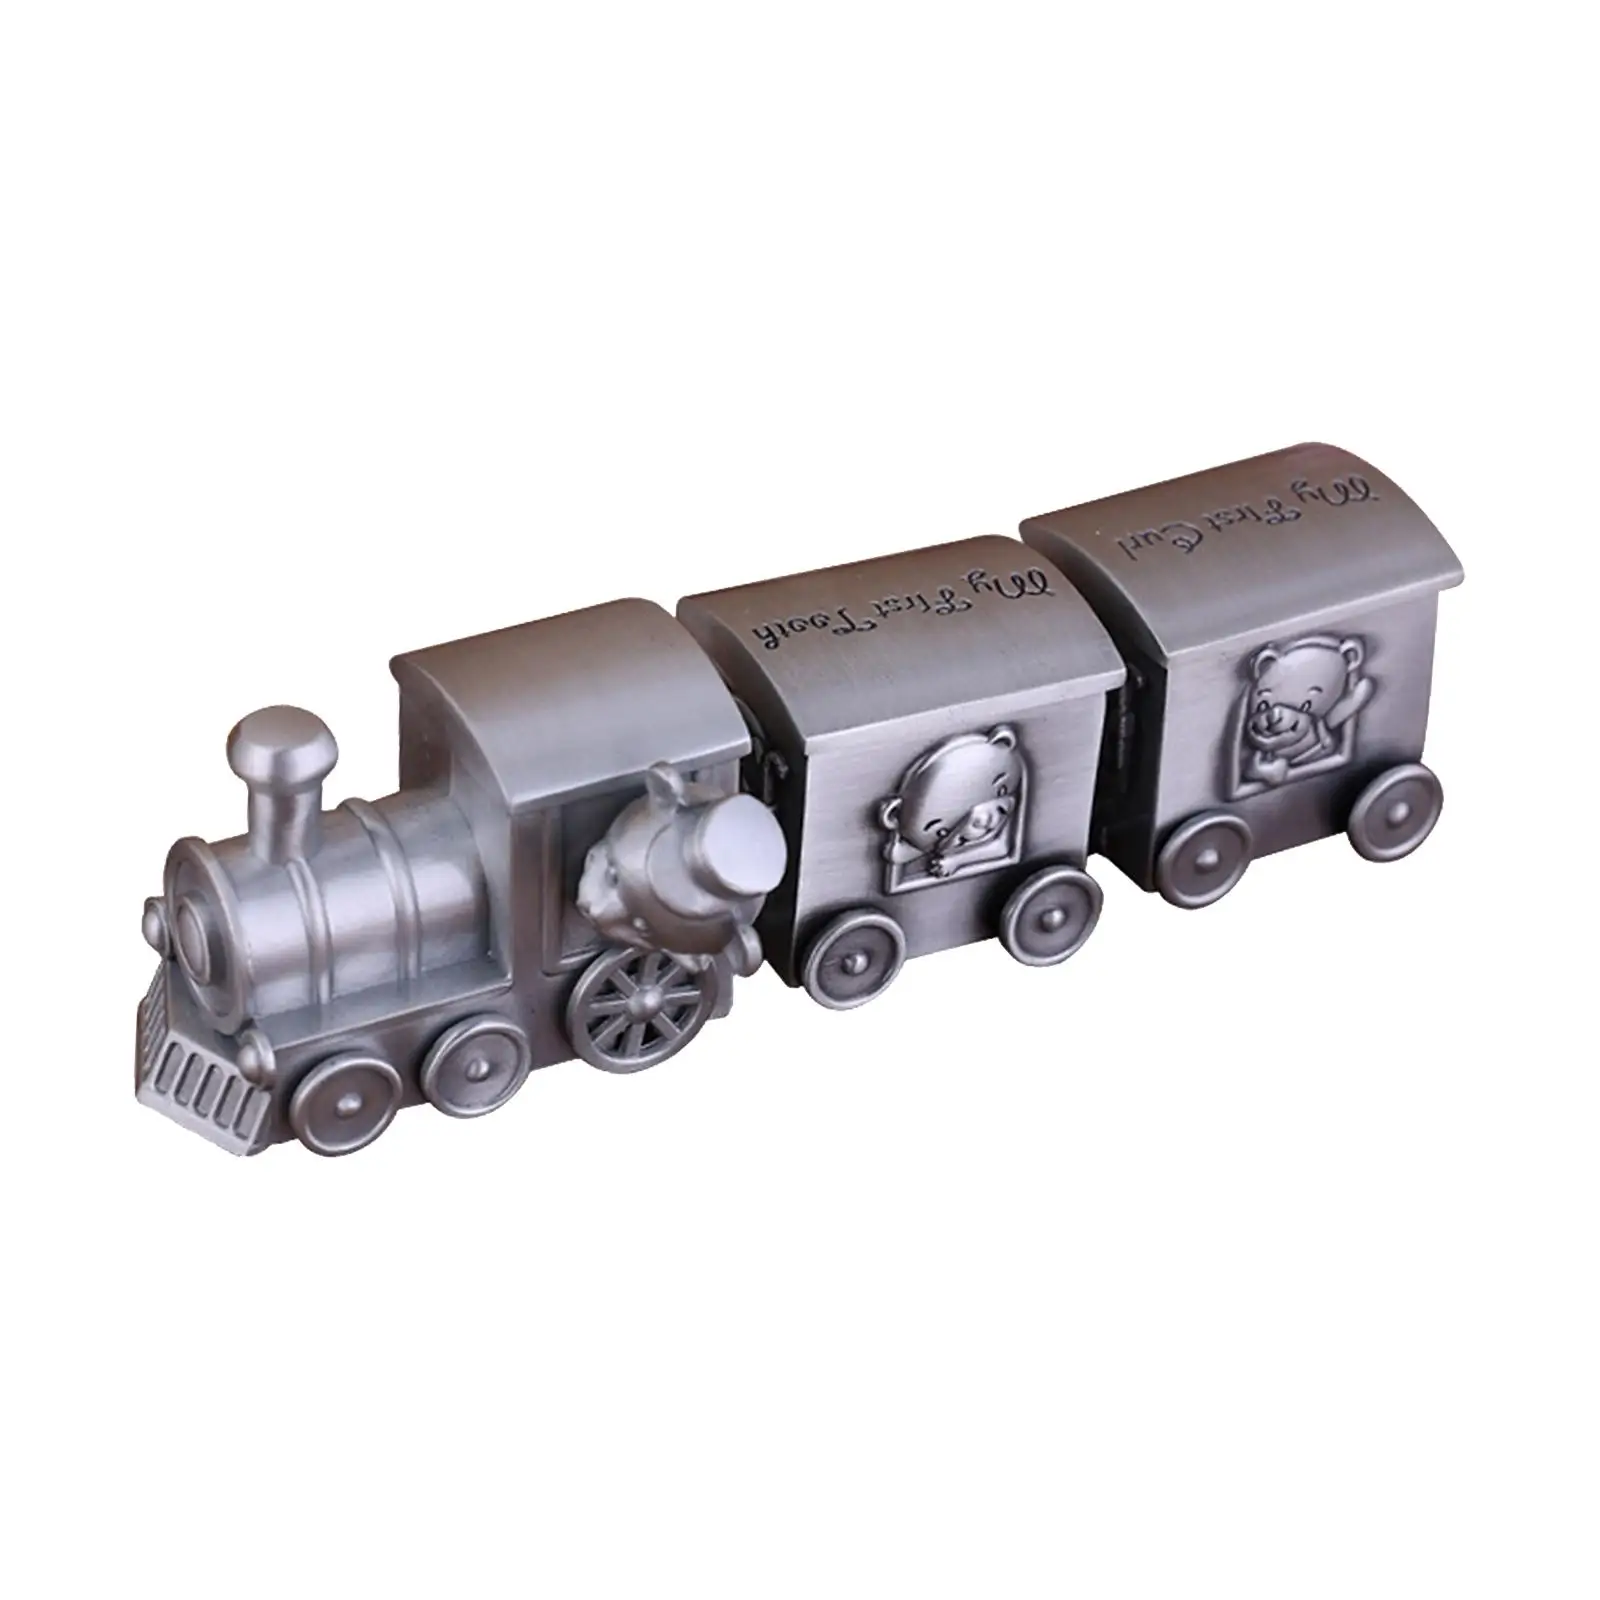 Baby Collections Box Childhood Memory Holder Metal Saver Box Train Tooth Holder for Childhood Souvenir Baby Shower Birthday Gift